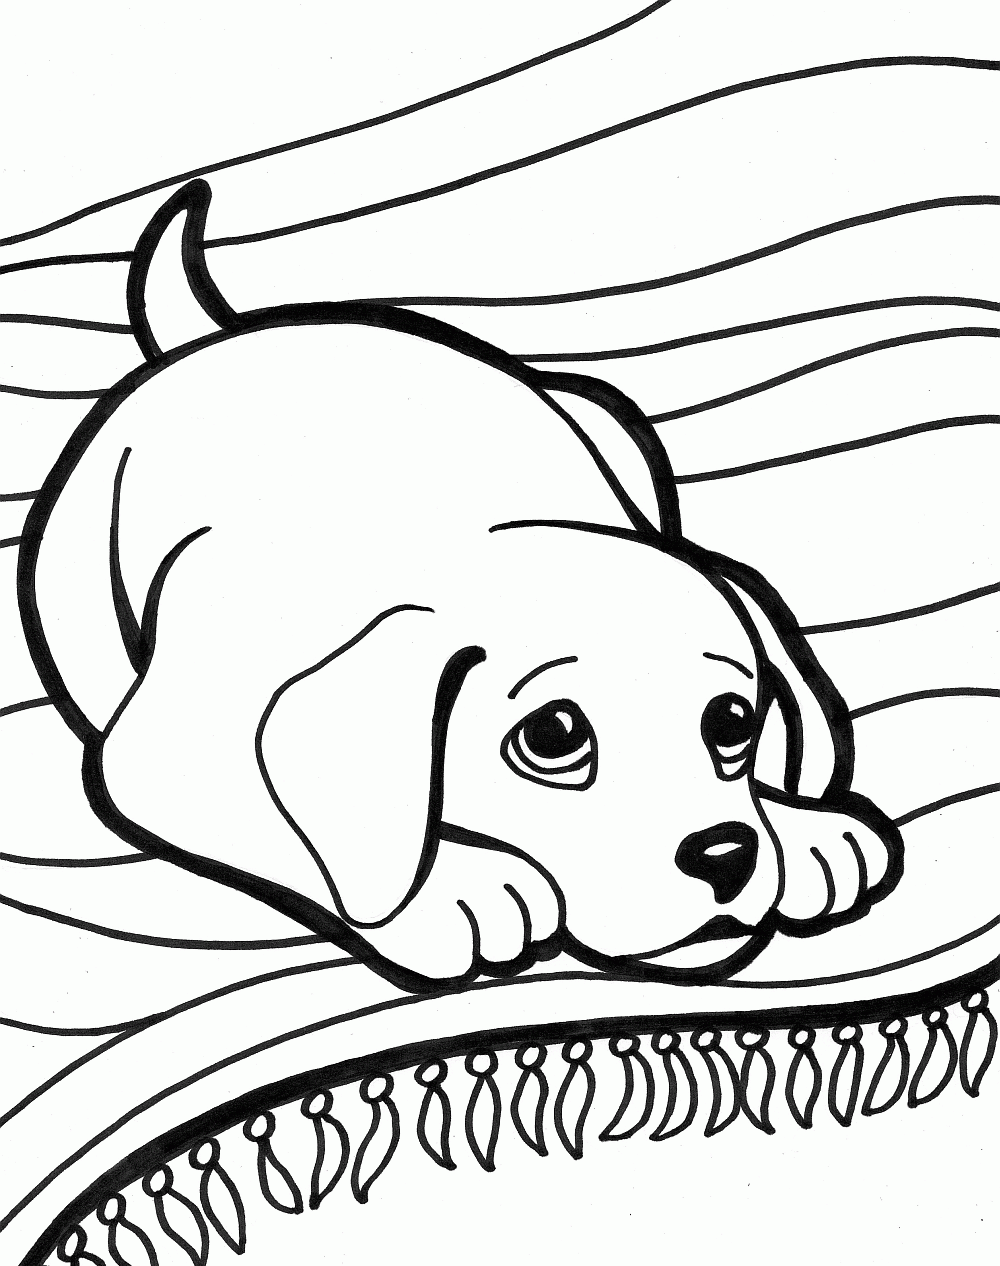 Download Free Cartoon Coloring Pages To Print - Cartoon Coloring Pages